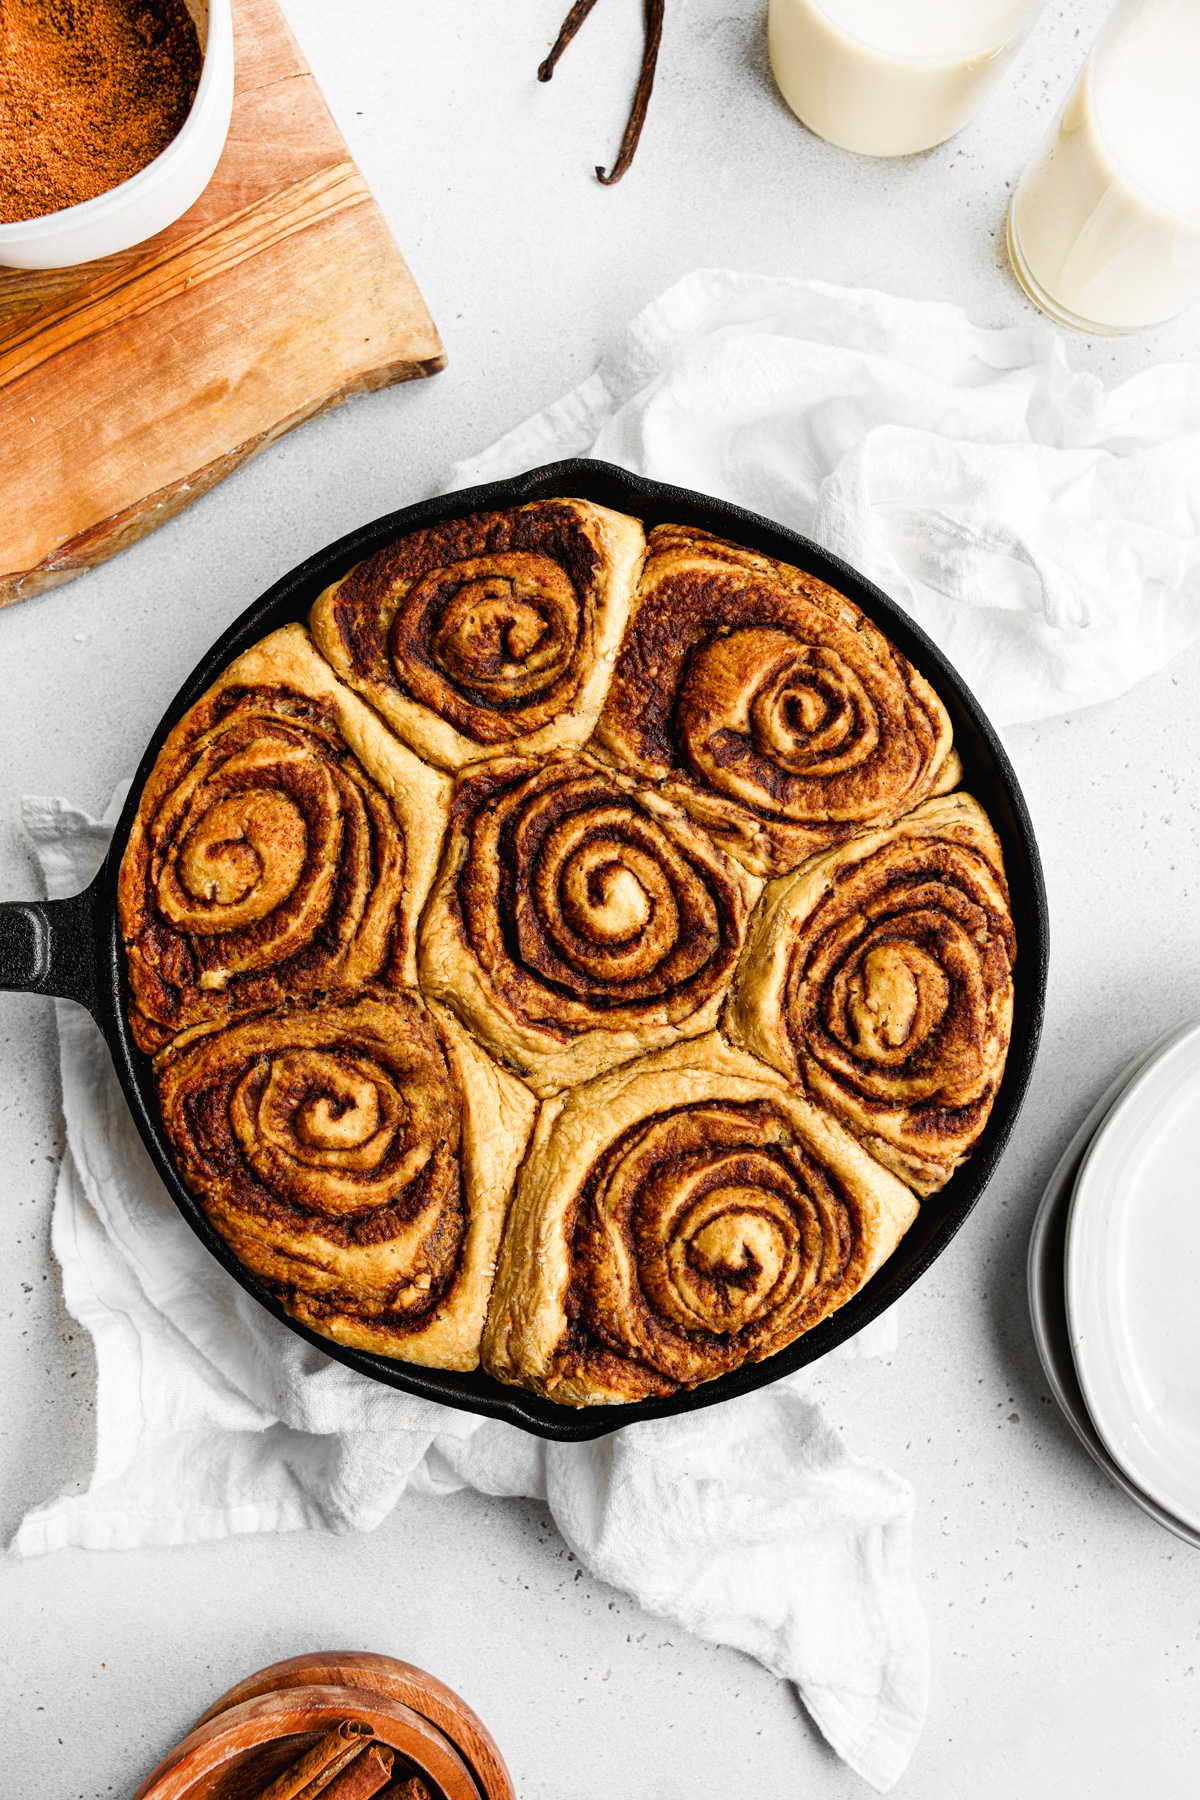 the vegan protein cinnamon rolls fresh out of the oven without the cream cheese glaze